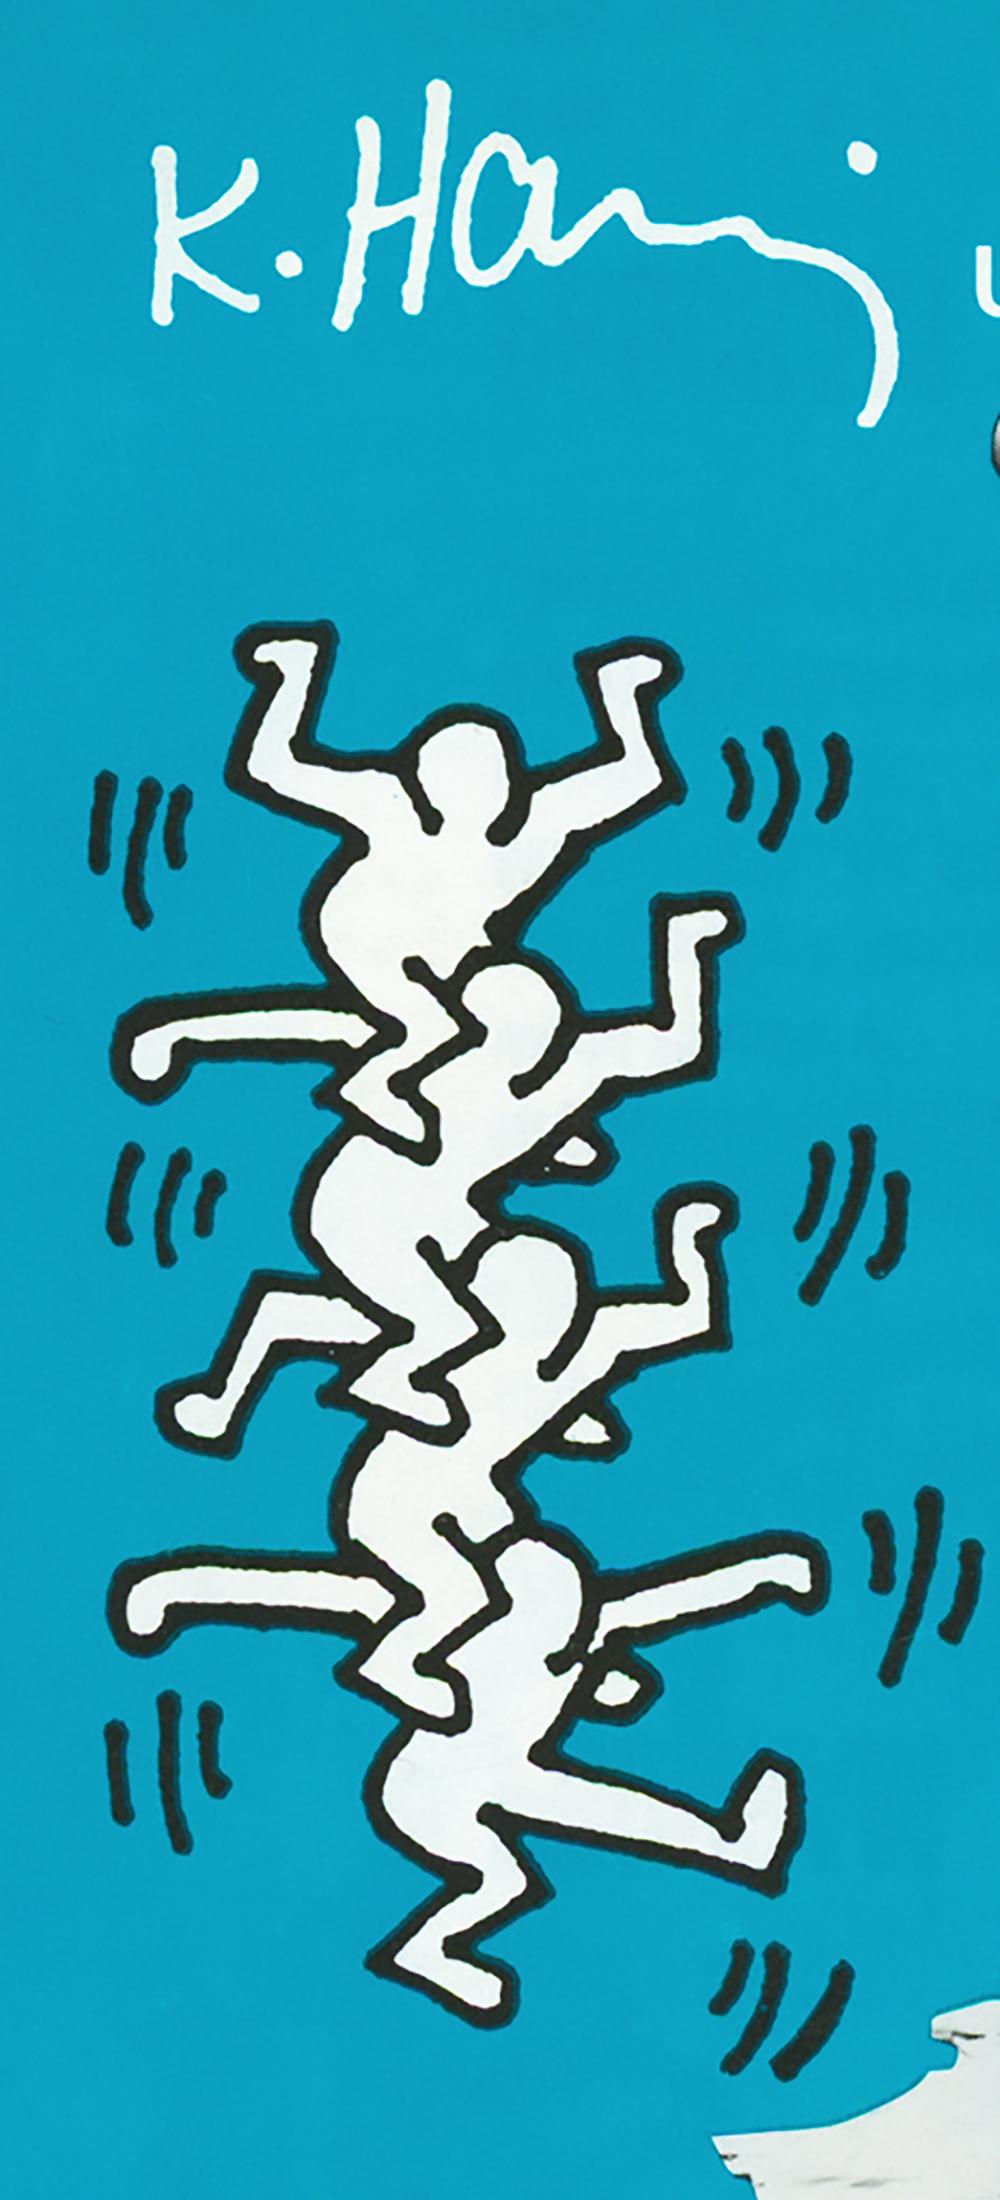 Keith Haring Yoko Ono 1987:
Rare 1980s Keith Haring illustrated announcement for “Dance Plus” - a 1987 week long performance hosted by Keith Haring, Tseng Kwon Chi, Yoko Ono, Judith Jamison, and Jennifer Muller - featuring the music of Yoko Ono and